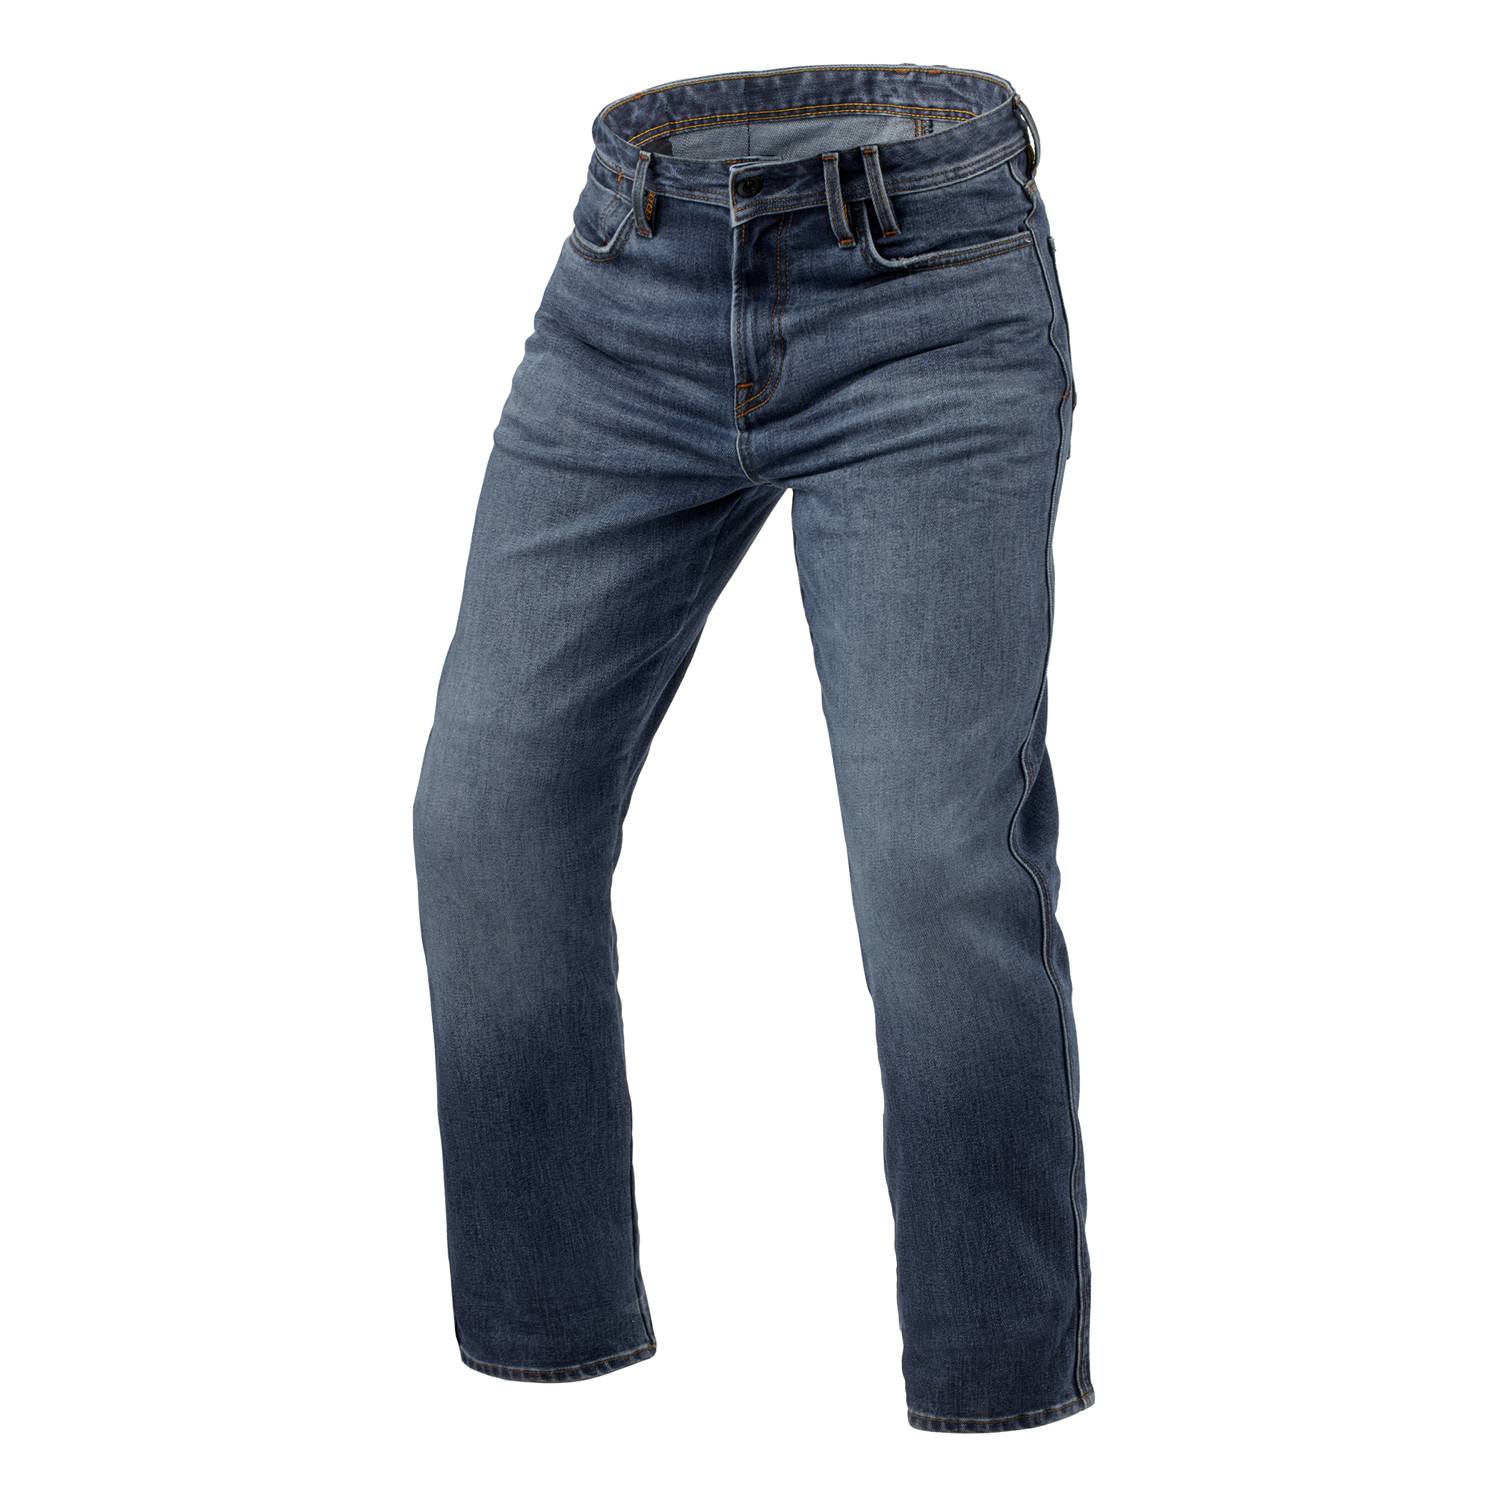 Image of REV'IT! Jeans Lombard 3 RF Medium Blue Stone L36 Motorcycle Jeans Taille L36/W30